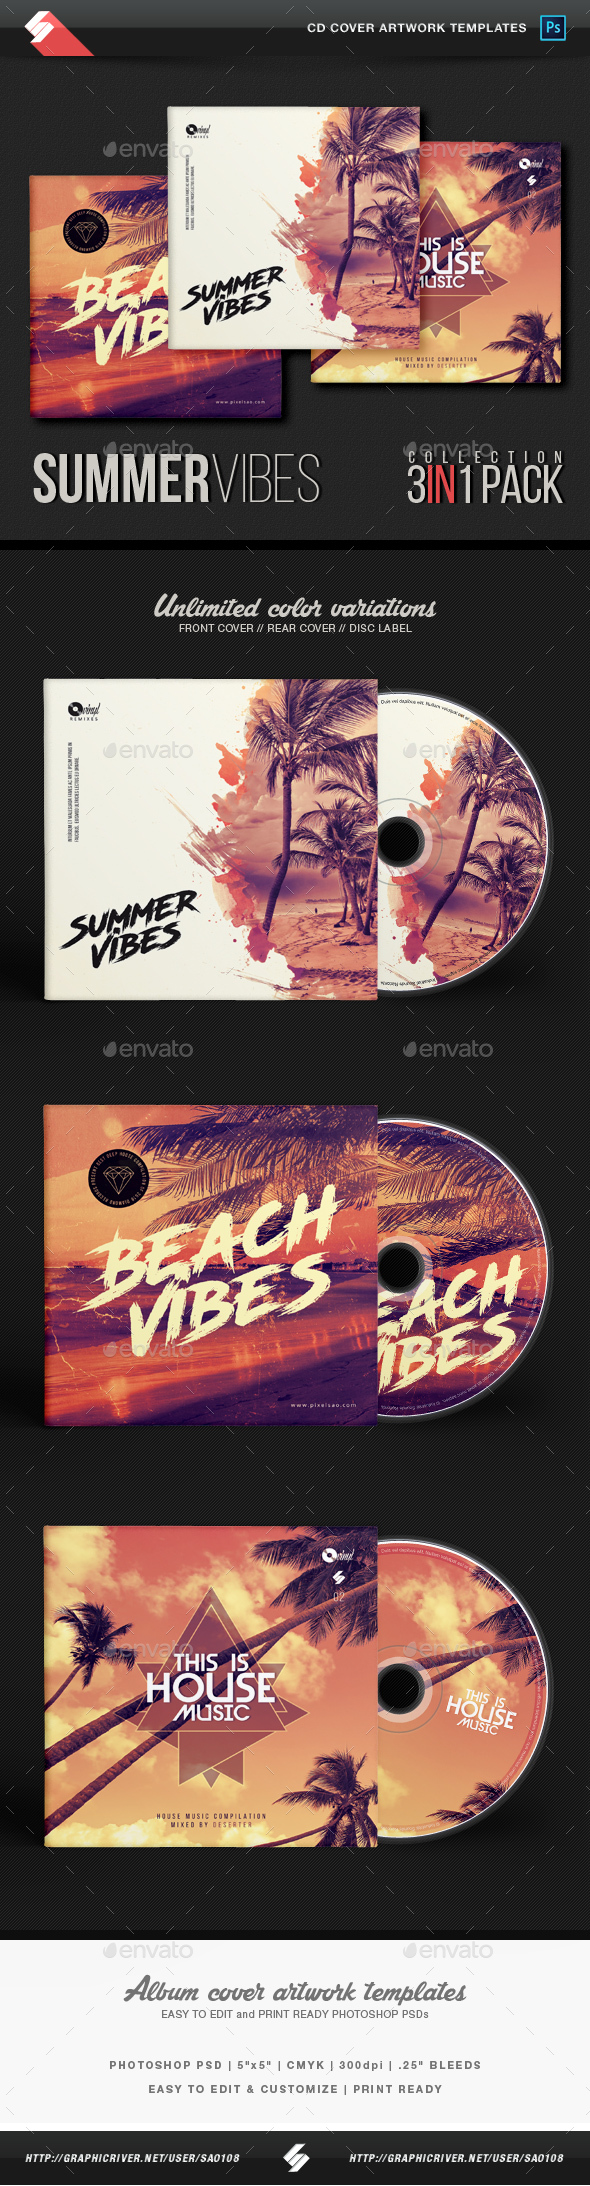 Download Cd Dvd Artwork Templates From Graphicriver PSD Mockup Templates